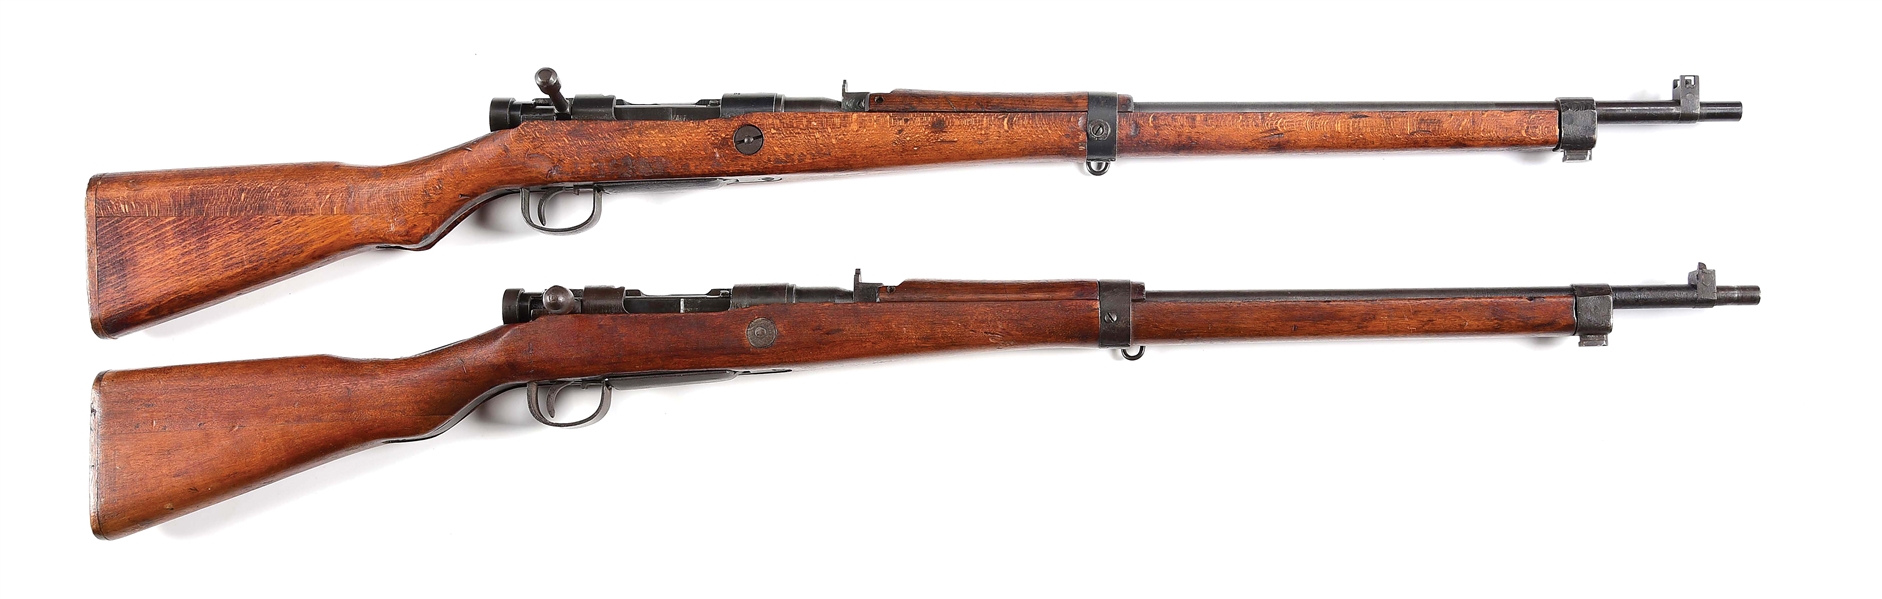 (C) LOT OF 2: LAST DITCH NAGOYA AND KOKURA TYPE 99 BOLT ACTION RIFLES WITH INTACT MUMS.